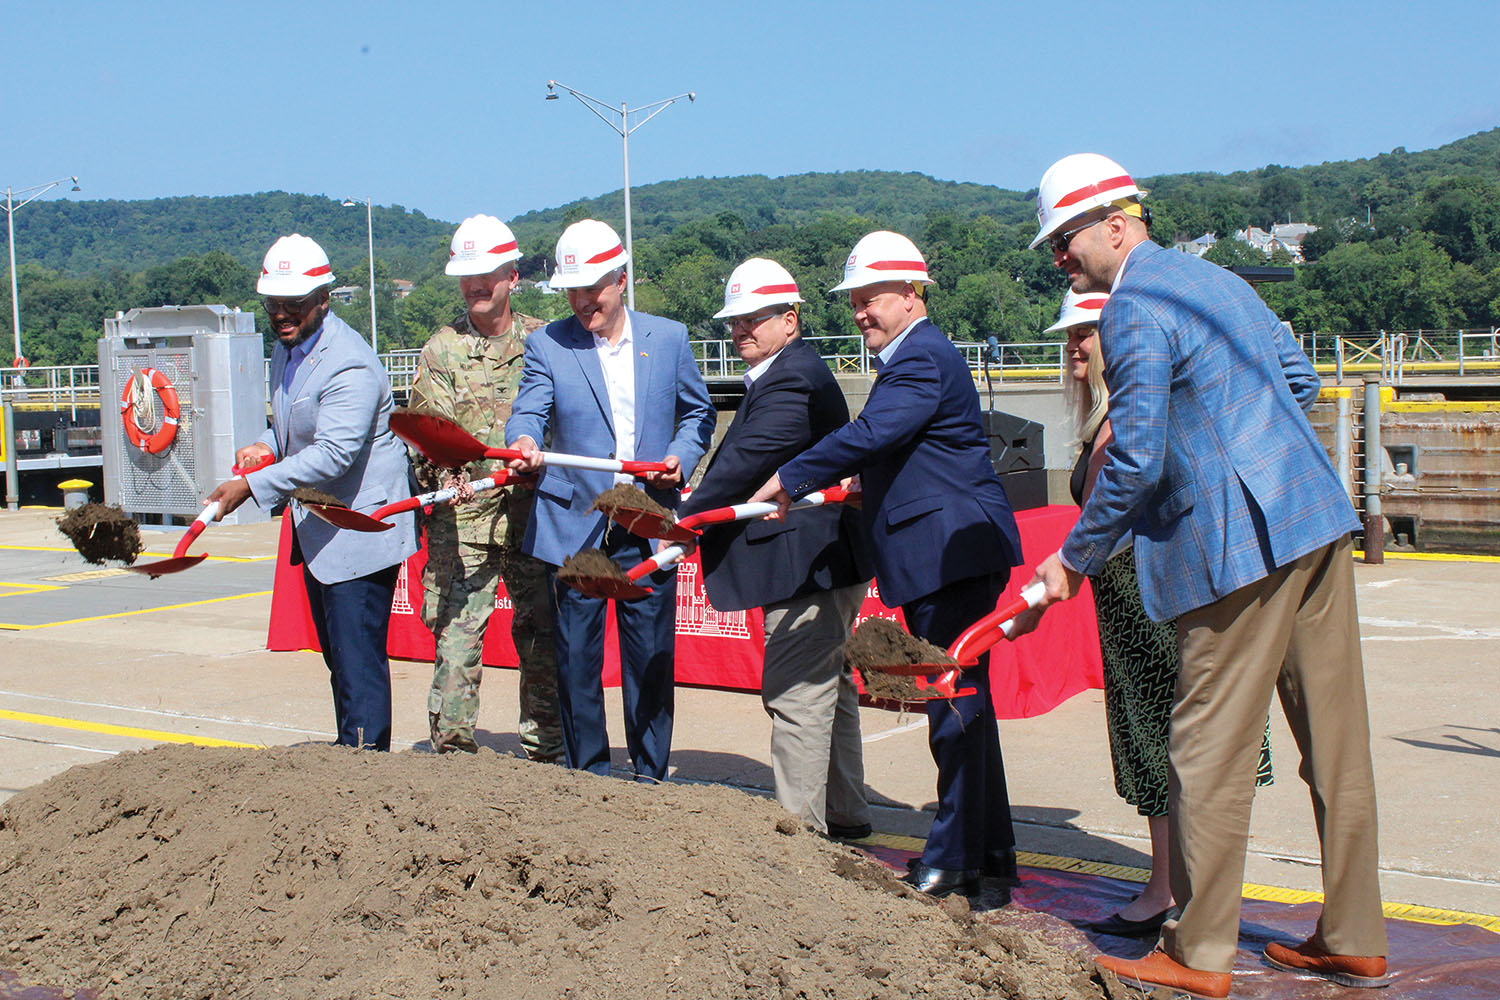 Corps, government and industry leaders turn shovels of dirt to ceremonially kick off the project. (photo by Shelley Byrne)